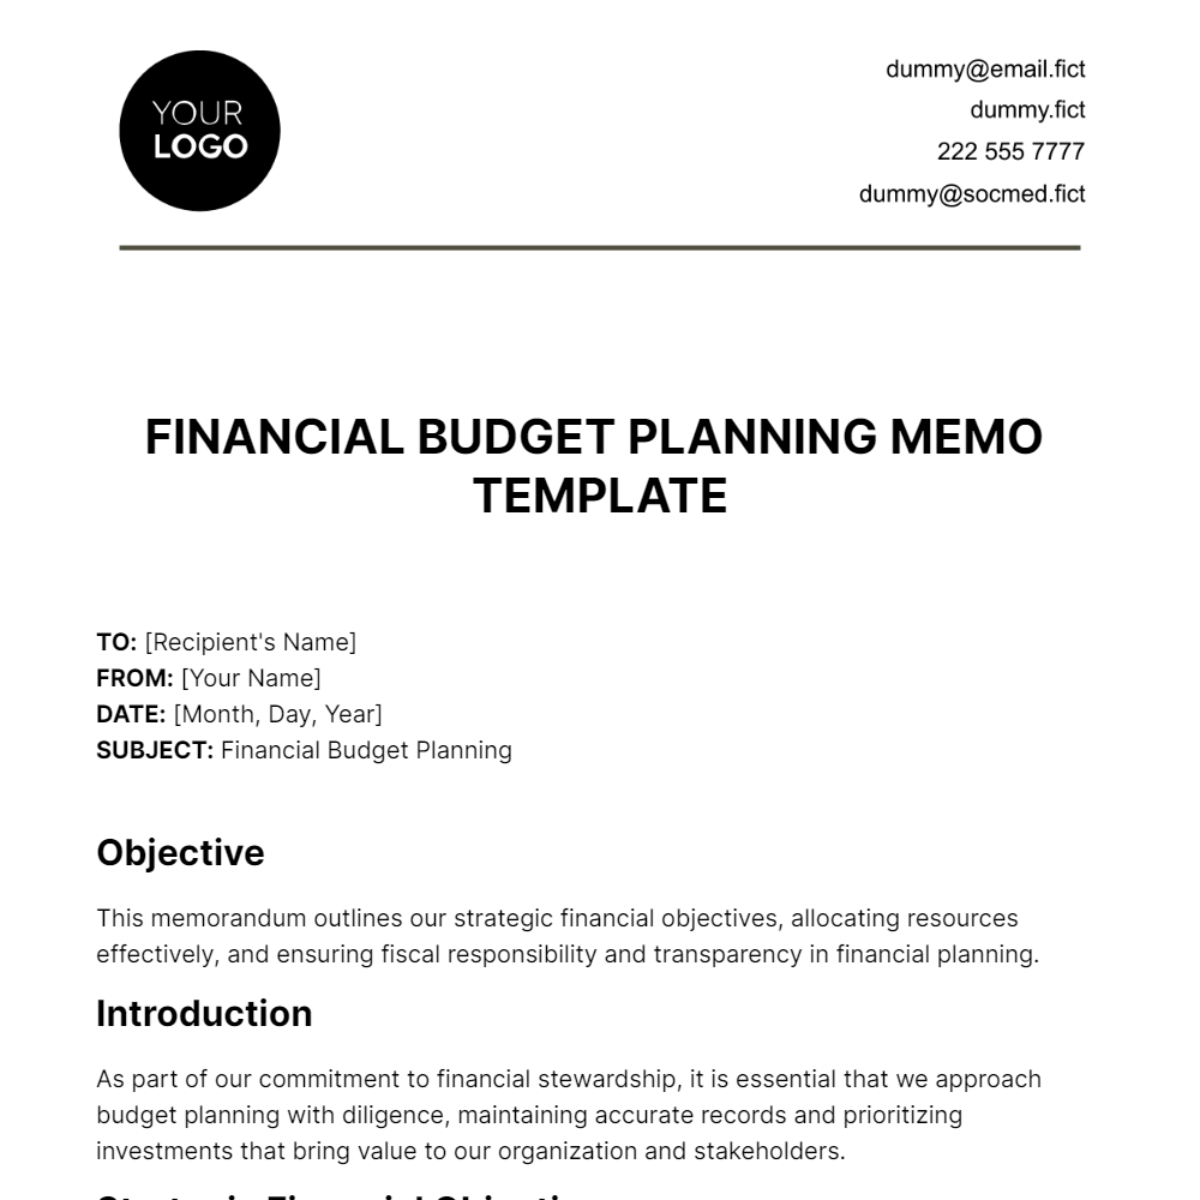 Financial Budget Planning Memo Template